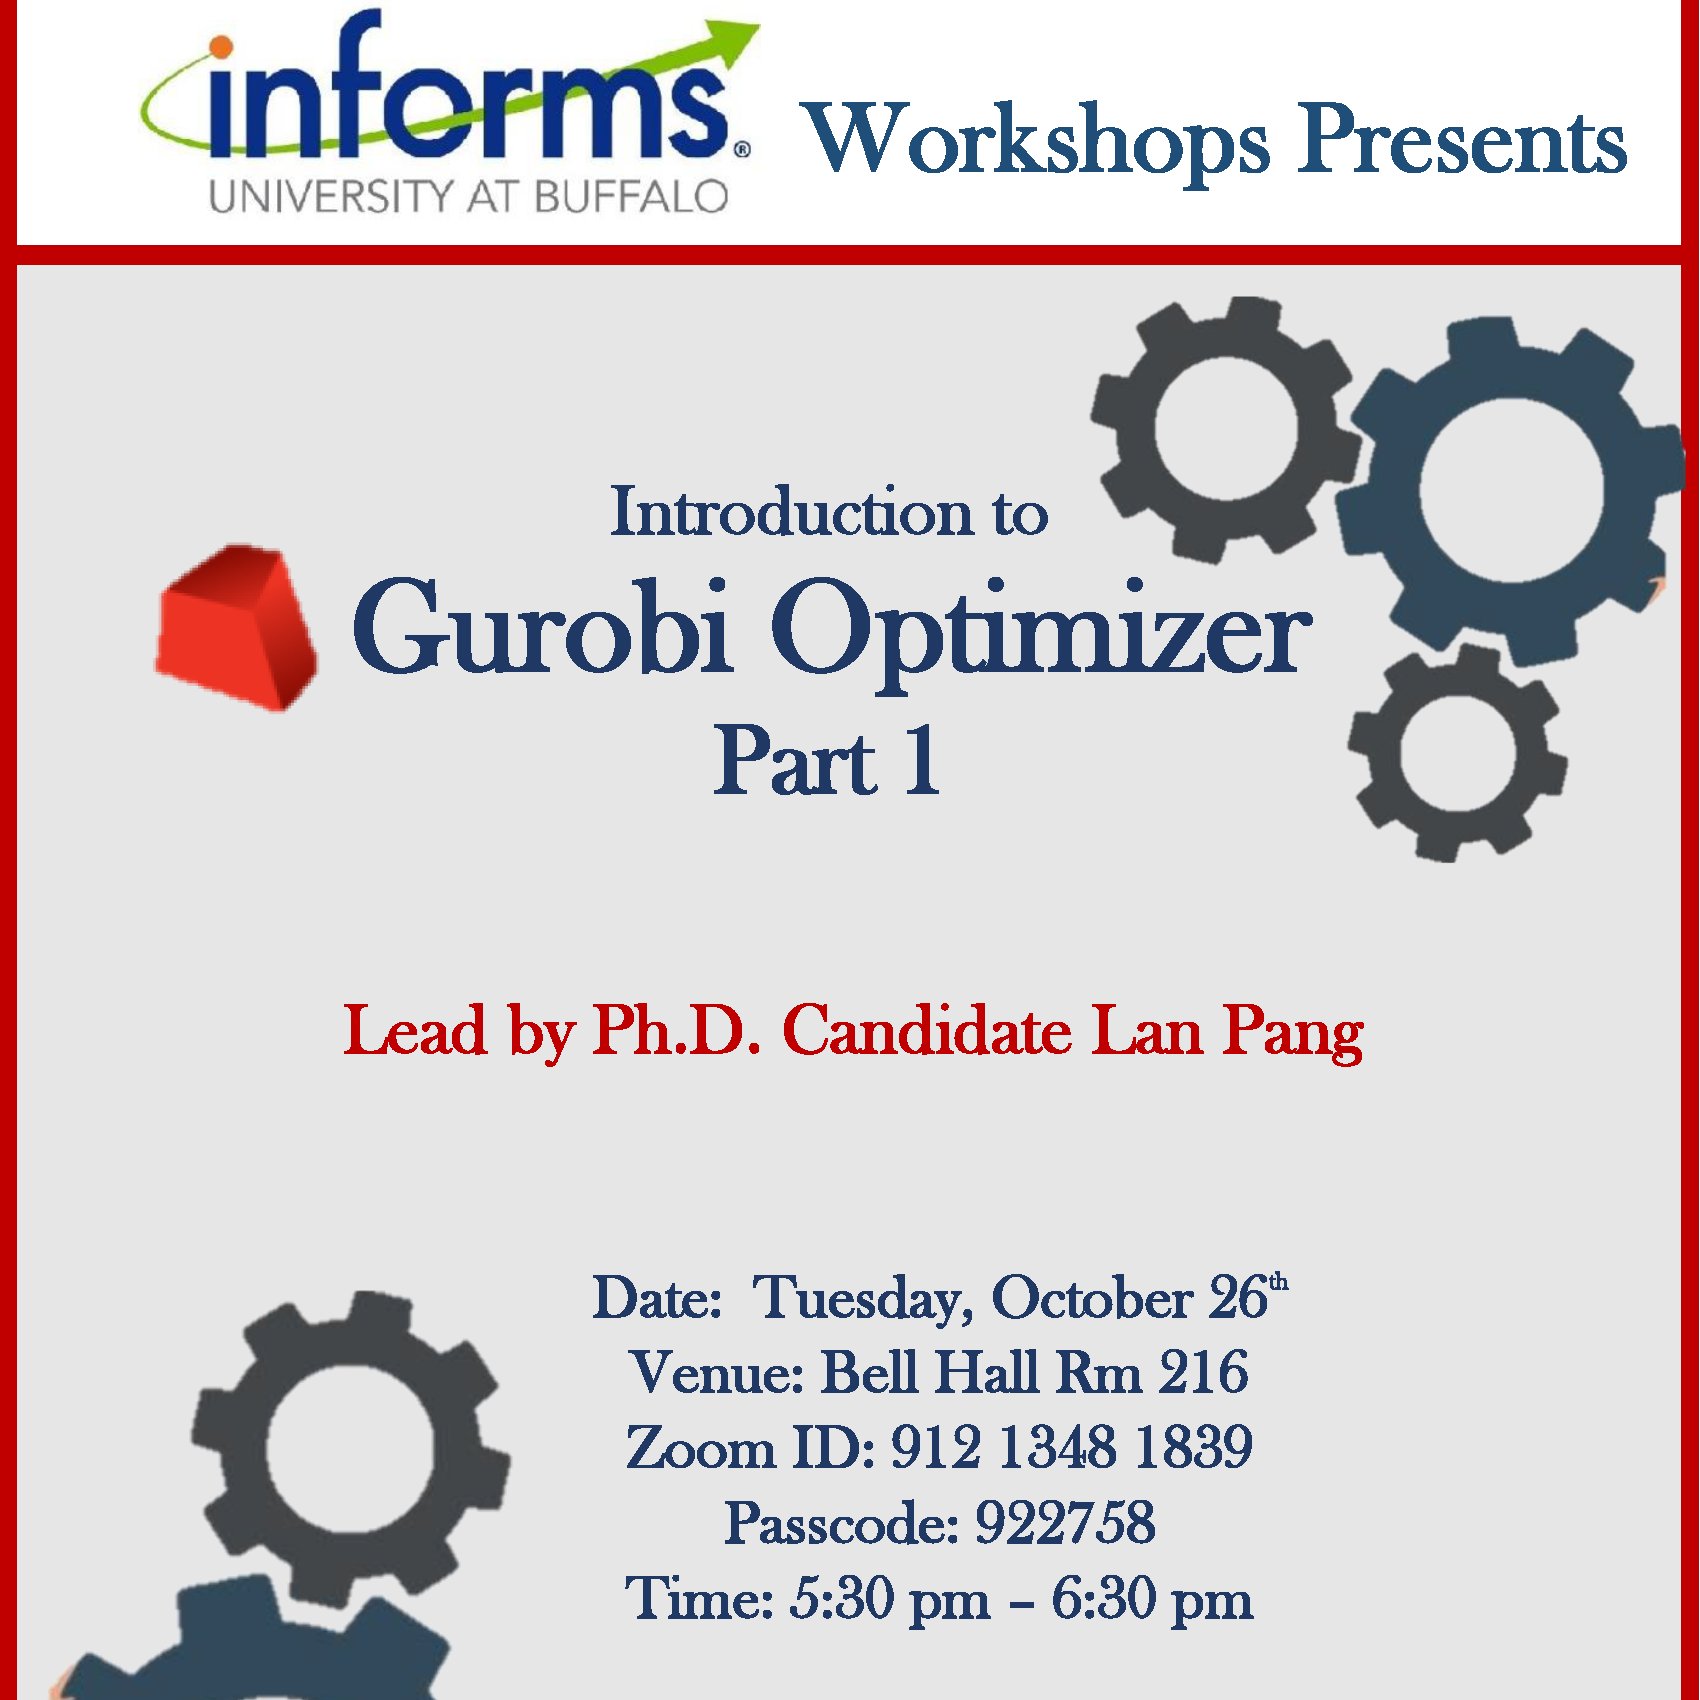 Tom Audreath Vært for Staple University at Buffalo Industrial Engineering on Twitter: "UB-INFORMS is  organizing a 2-part Gurobi workshop series (by Lan Peng) this semester. In  part 1 of the series, learn about the basics of using